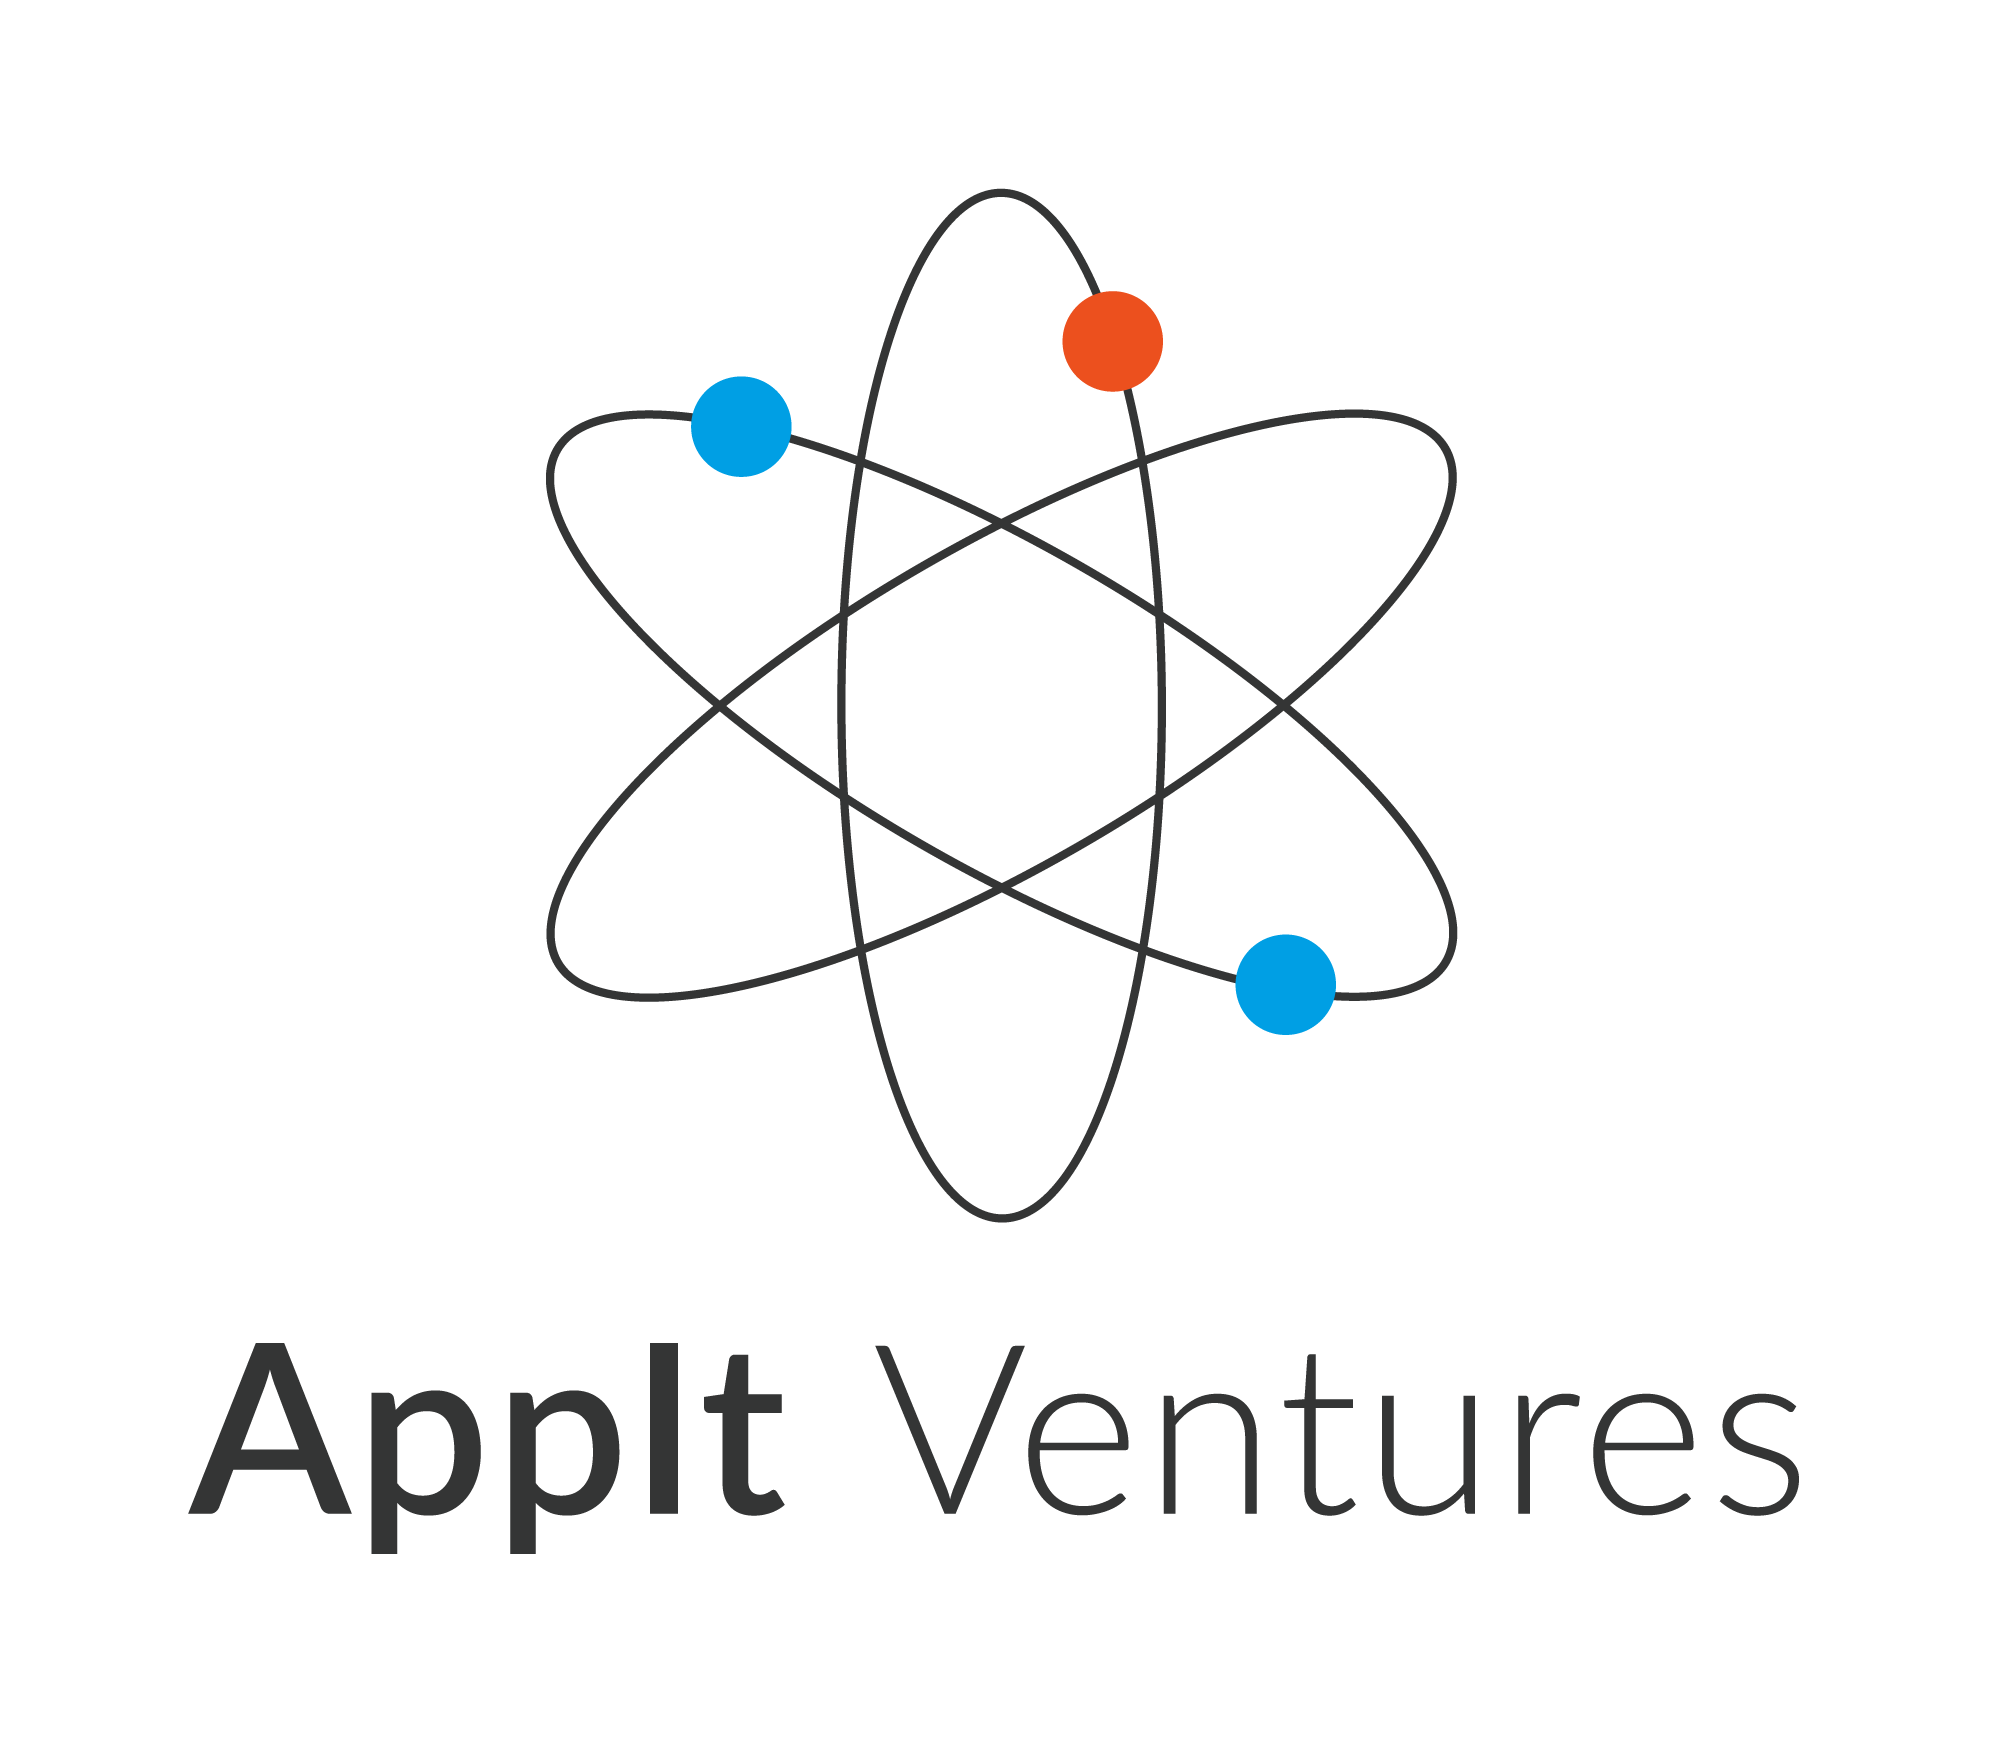 AppIt Ventures profile on Qualified.One